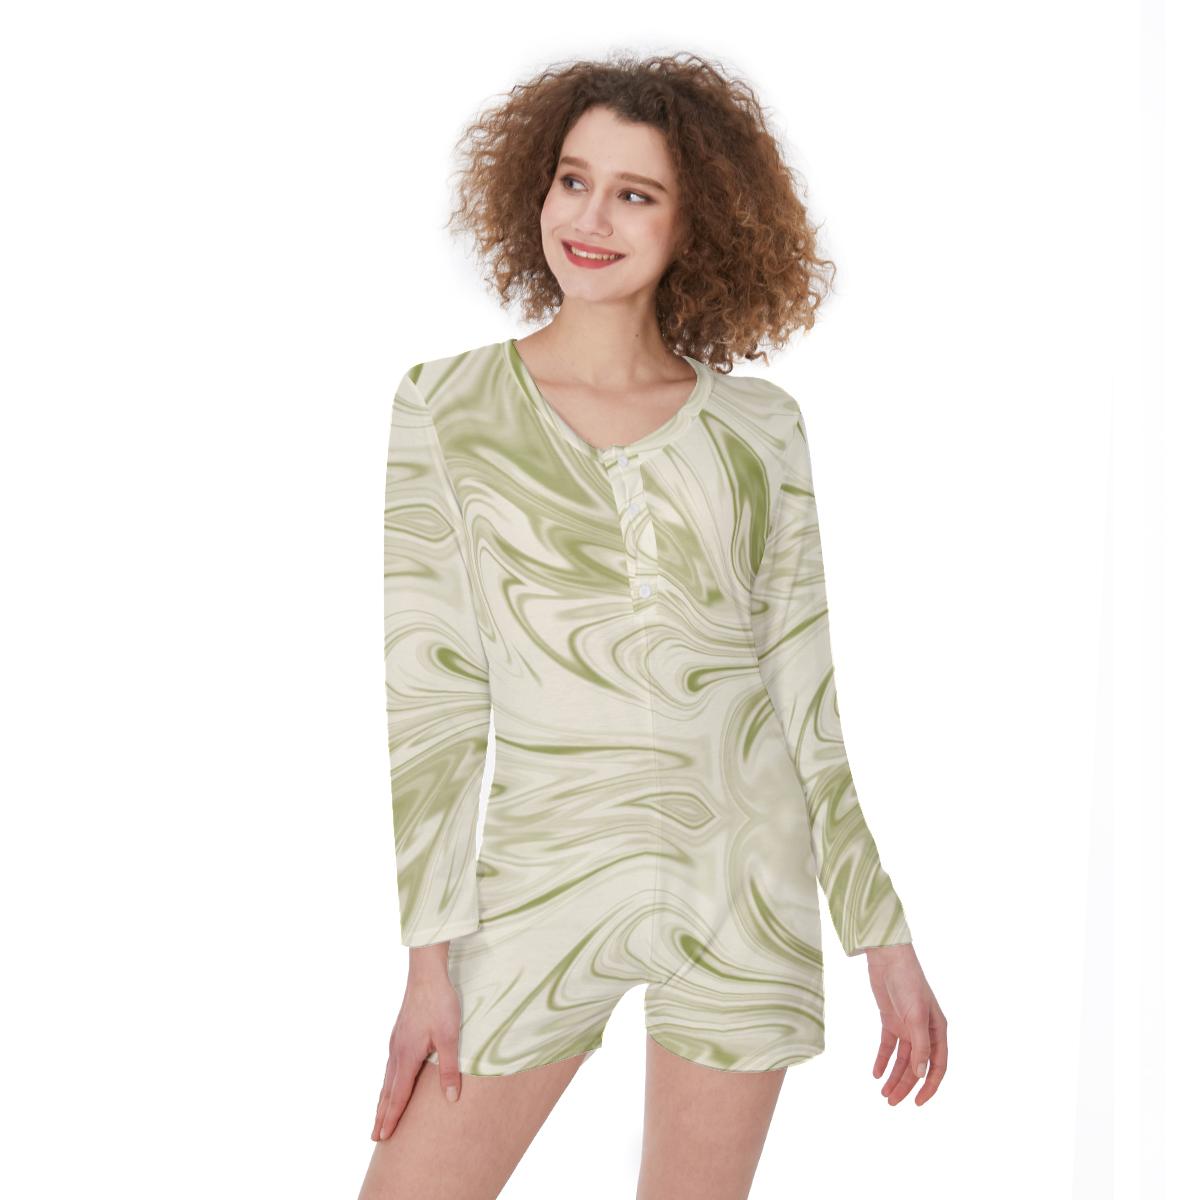 Ivory Color Women's Pajamas Nightgown, Ivory Green Liquid Waves Abstract Pajamas Loungewear